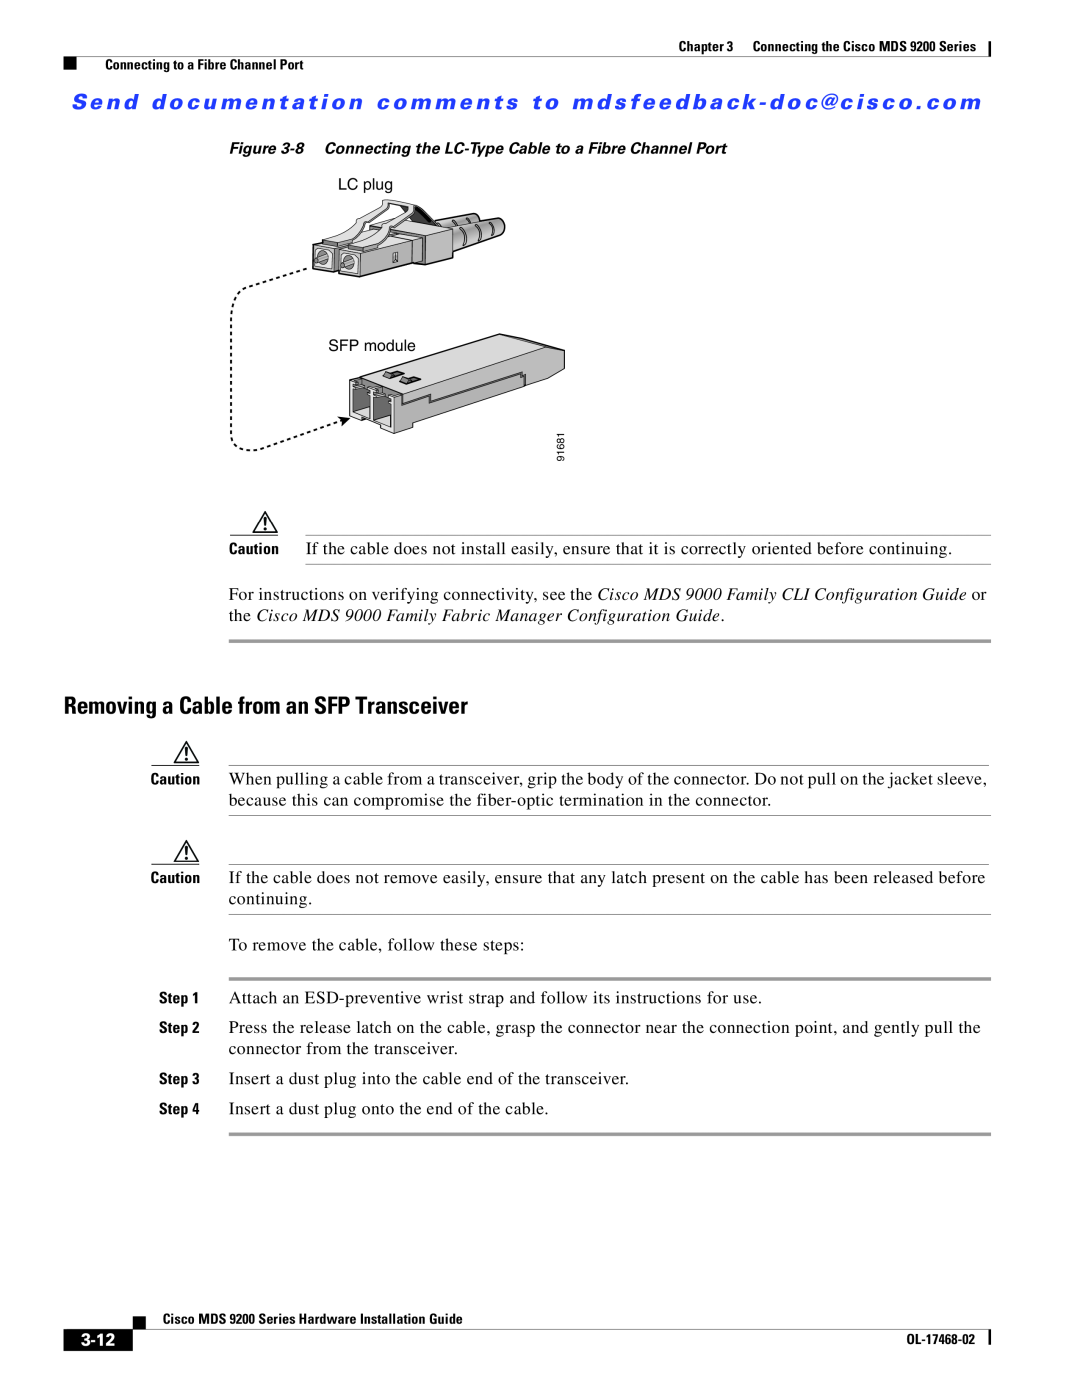 Cisco Systems MDS 9200 Series manual Removing a Cable from an SFP Transceiver, 3-12 